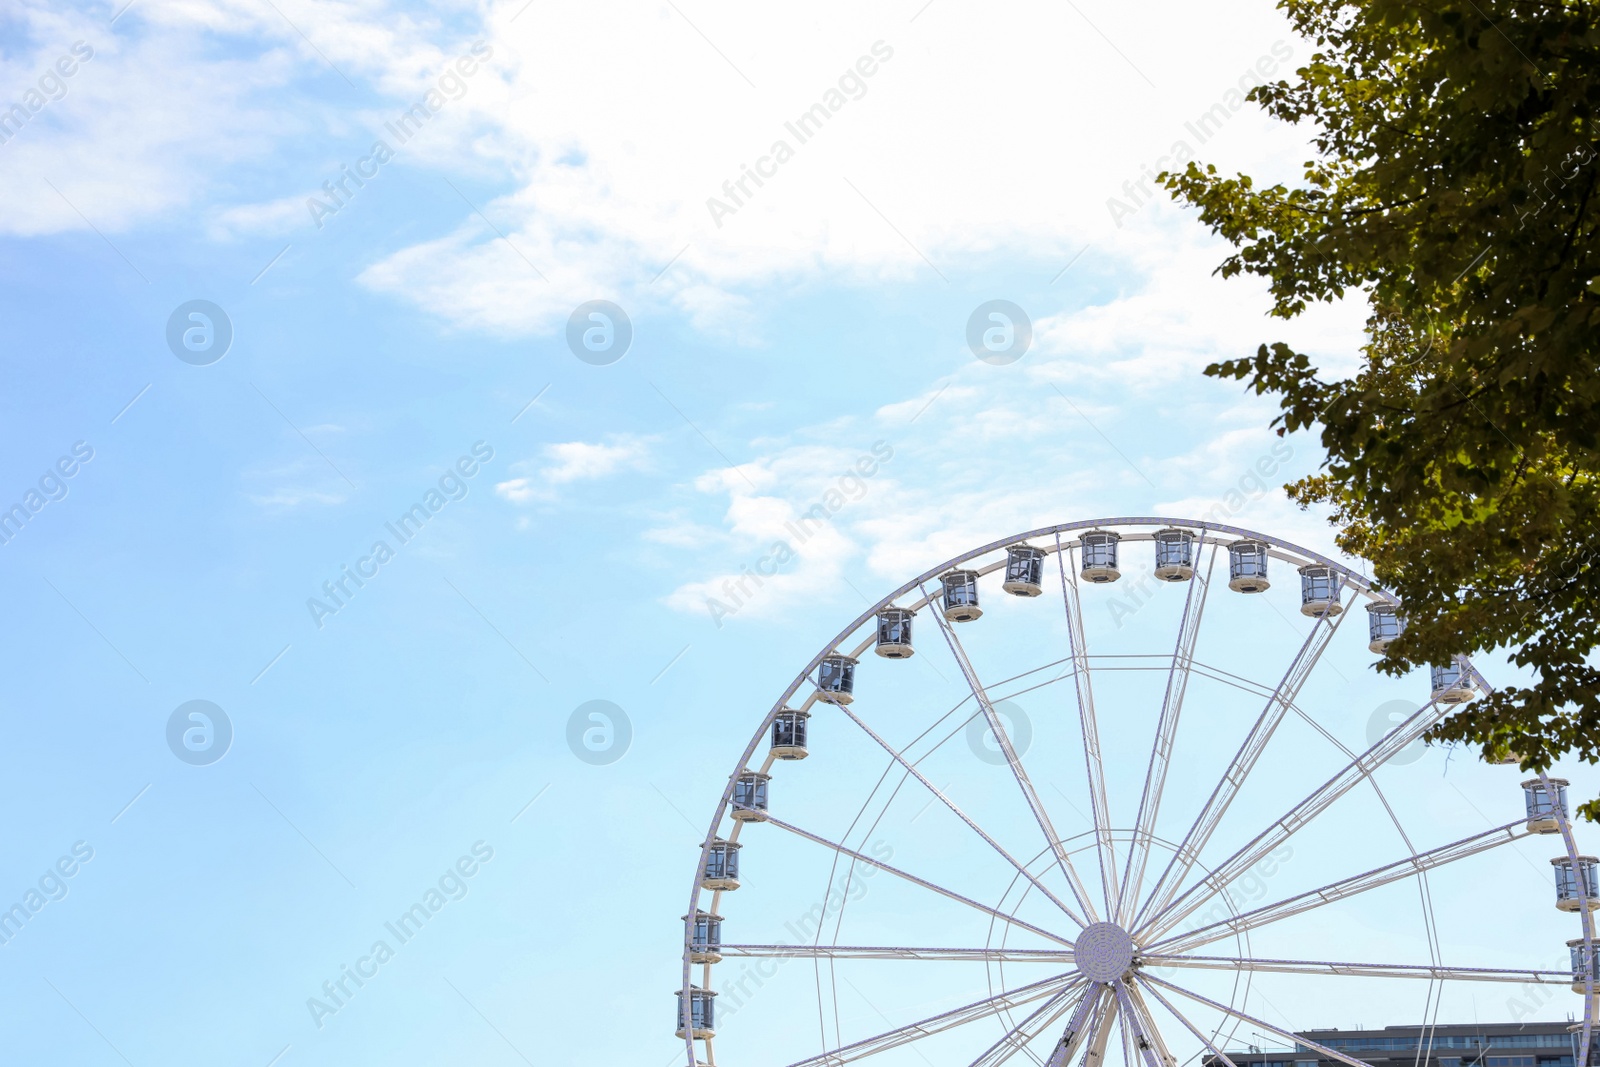 Photo of Picturesque view of beautiful Ferris wheel in city, space for text